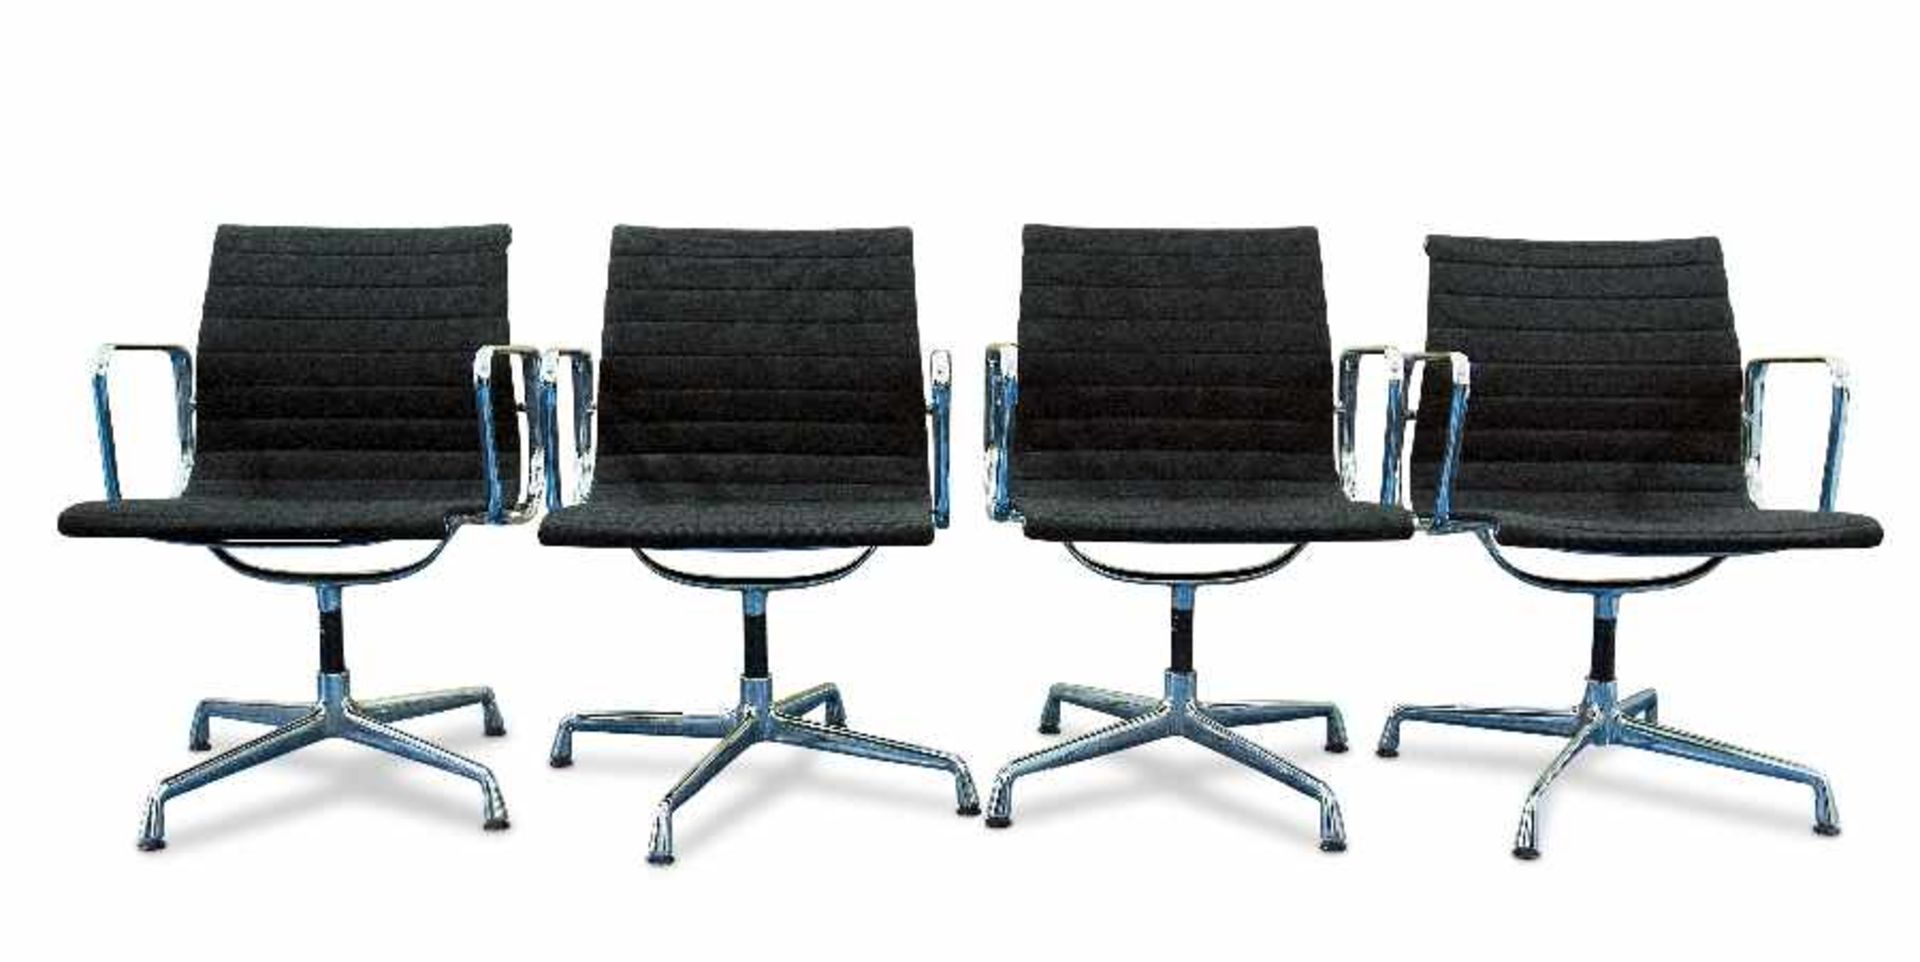 Ray and Charles Eames1912/1907 - 1988/19784 Aluminium Chairs EA 108Aluminum and Hopsak with plastic;